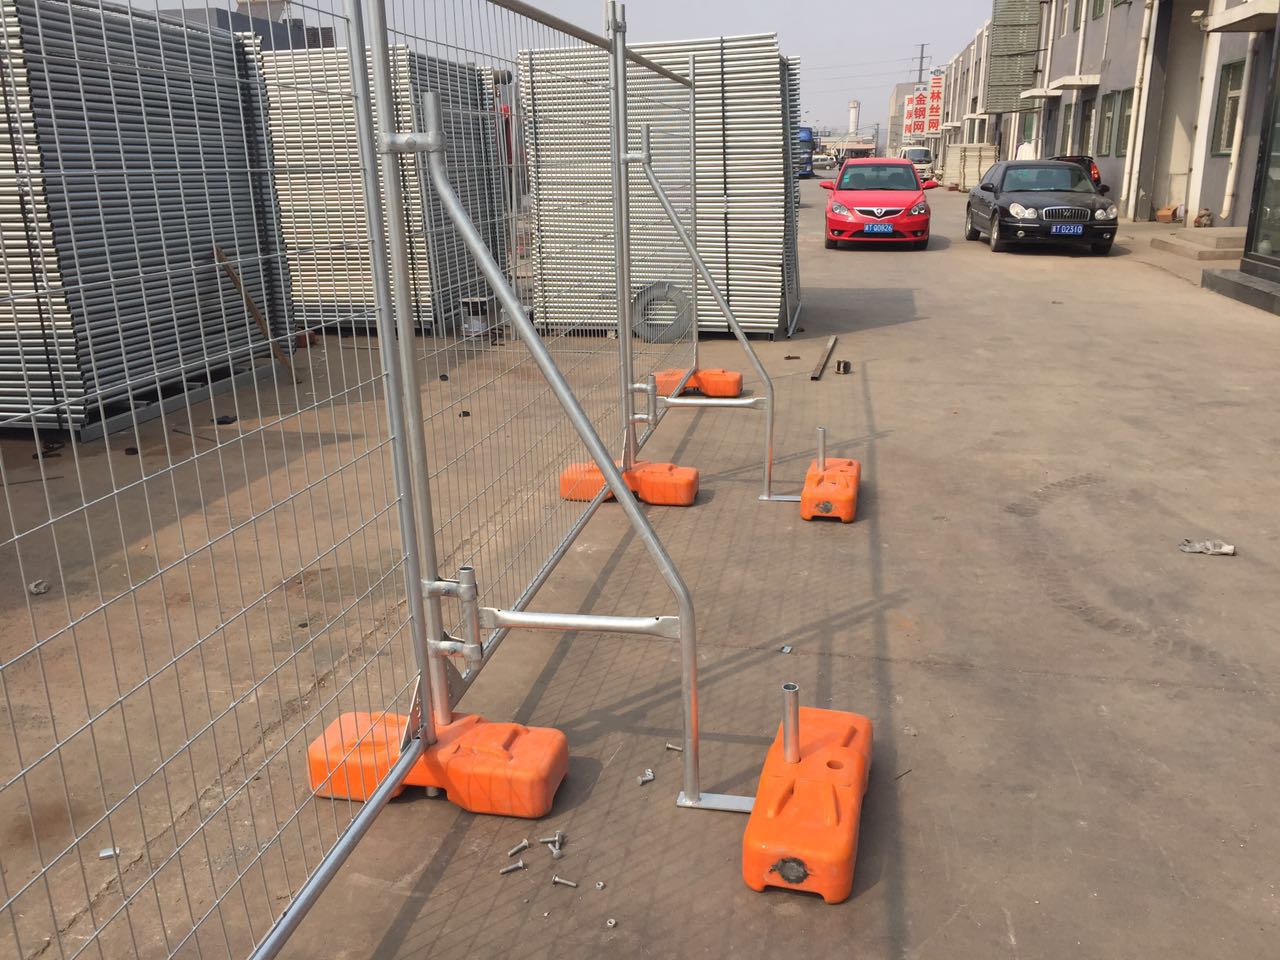 2.1 x 2 .4 m Temporary Fencing For Sale Australia Standards